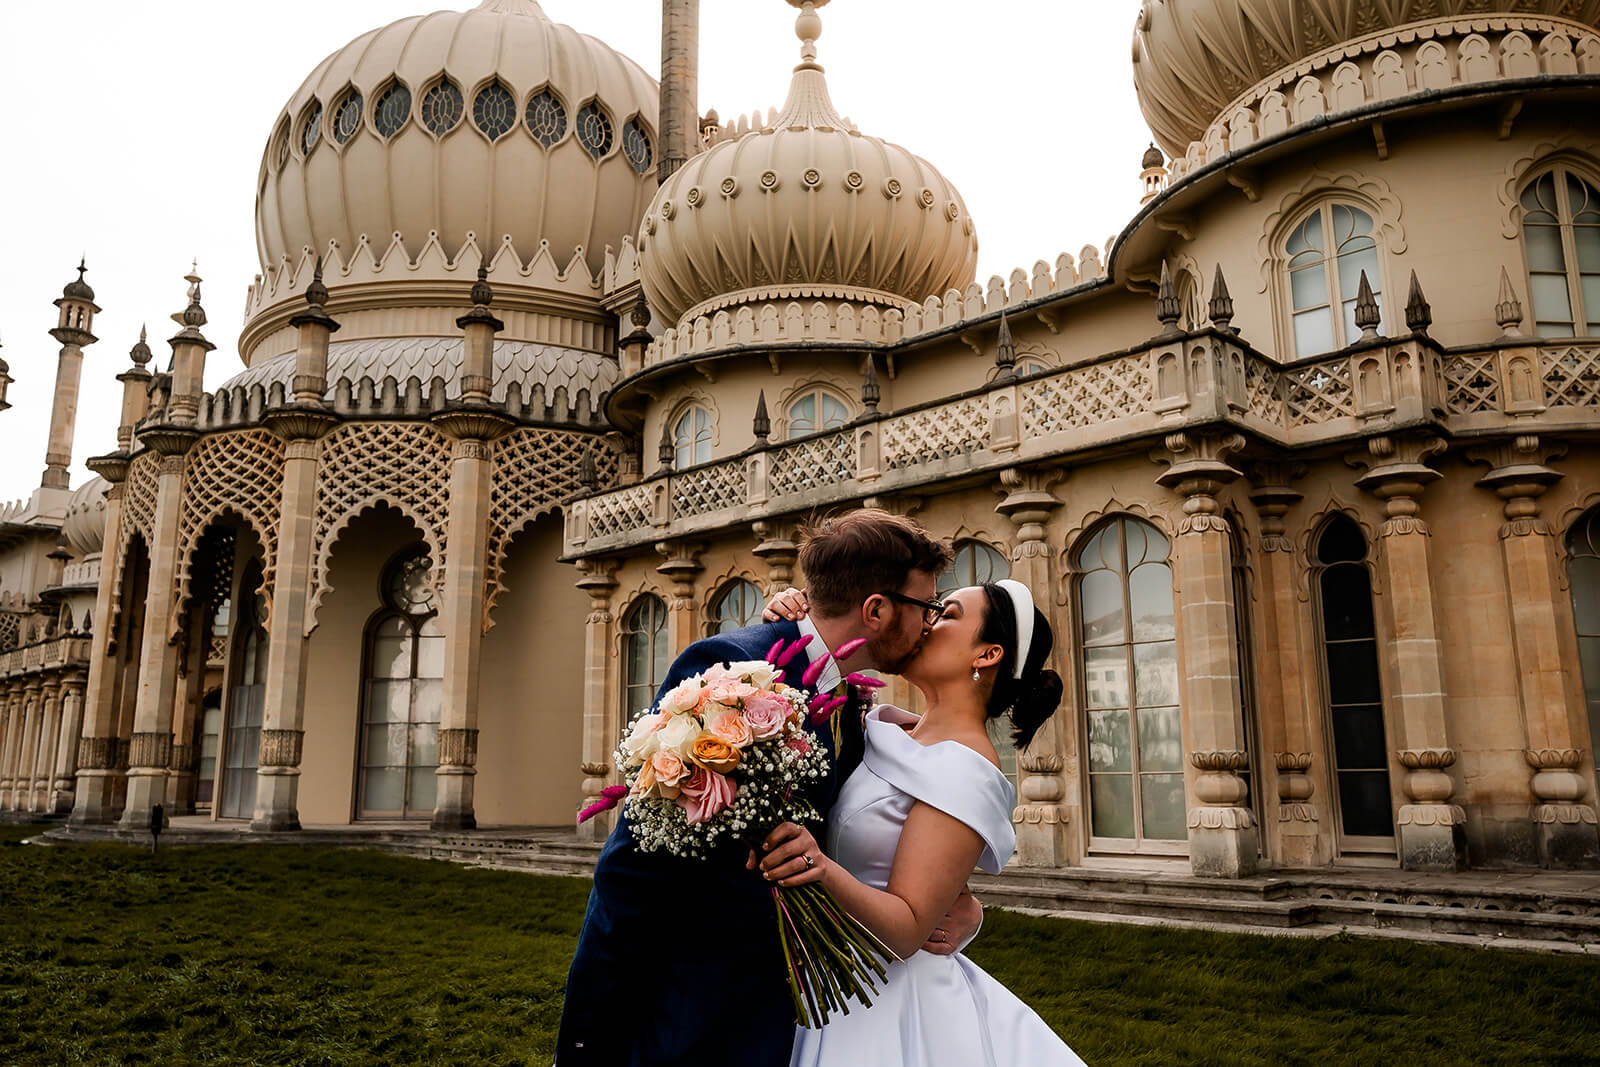 Groom and bride kissing outside the most beautiful building. London wedding photographer Emis Weddings